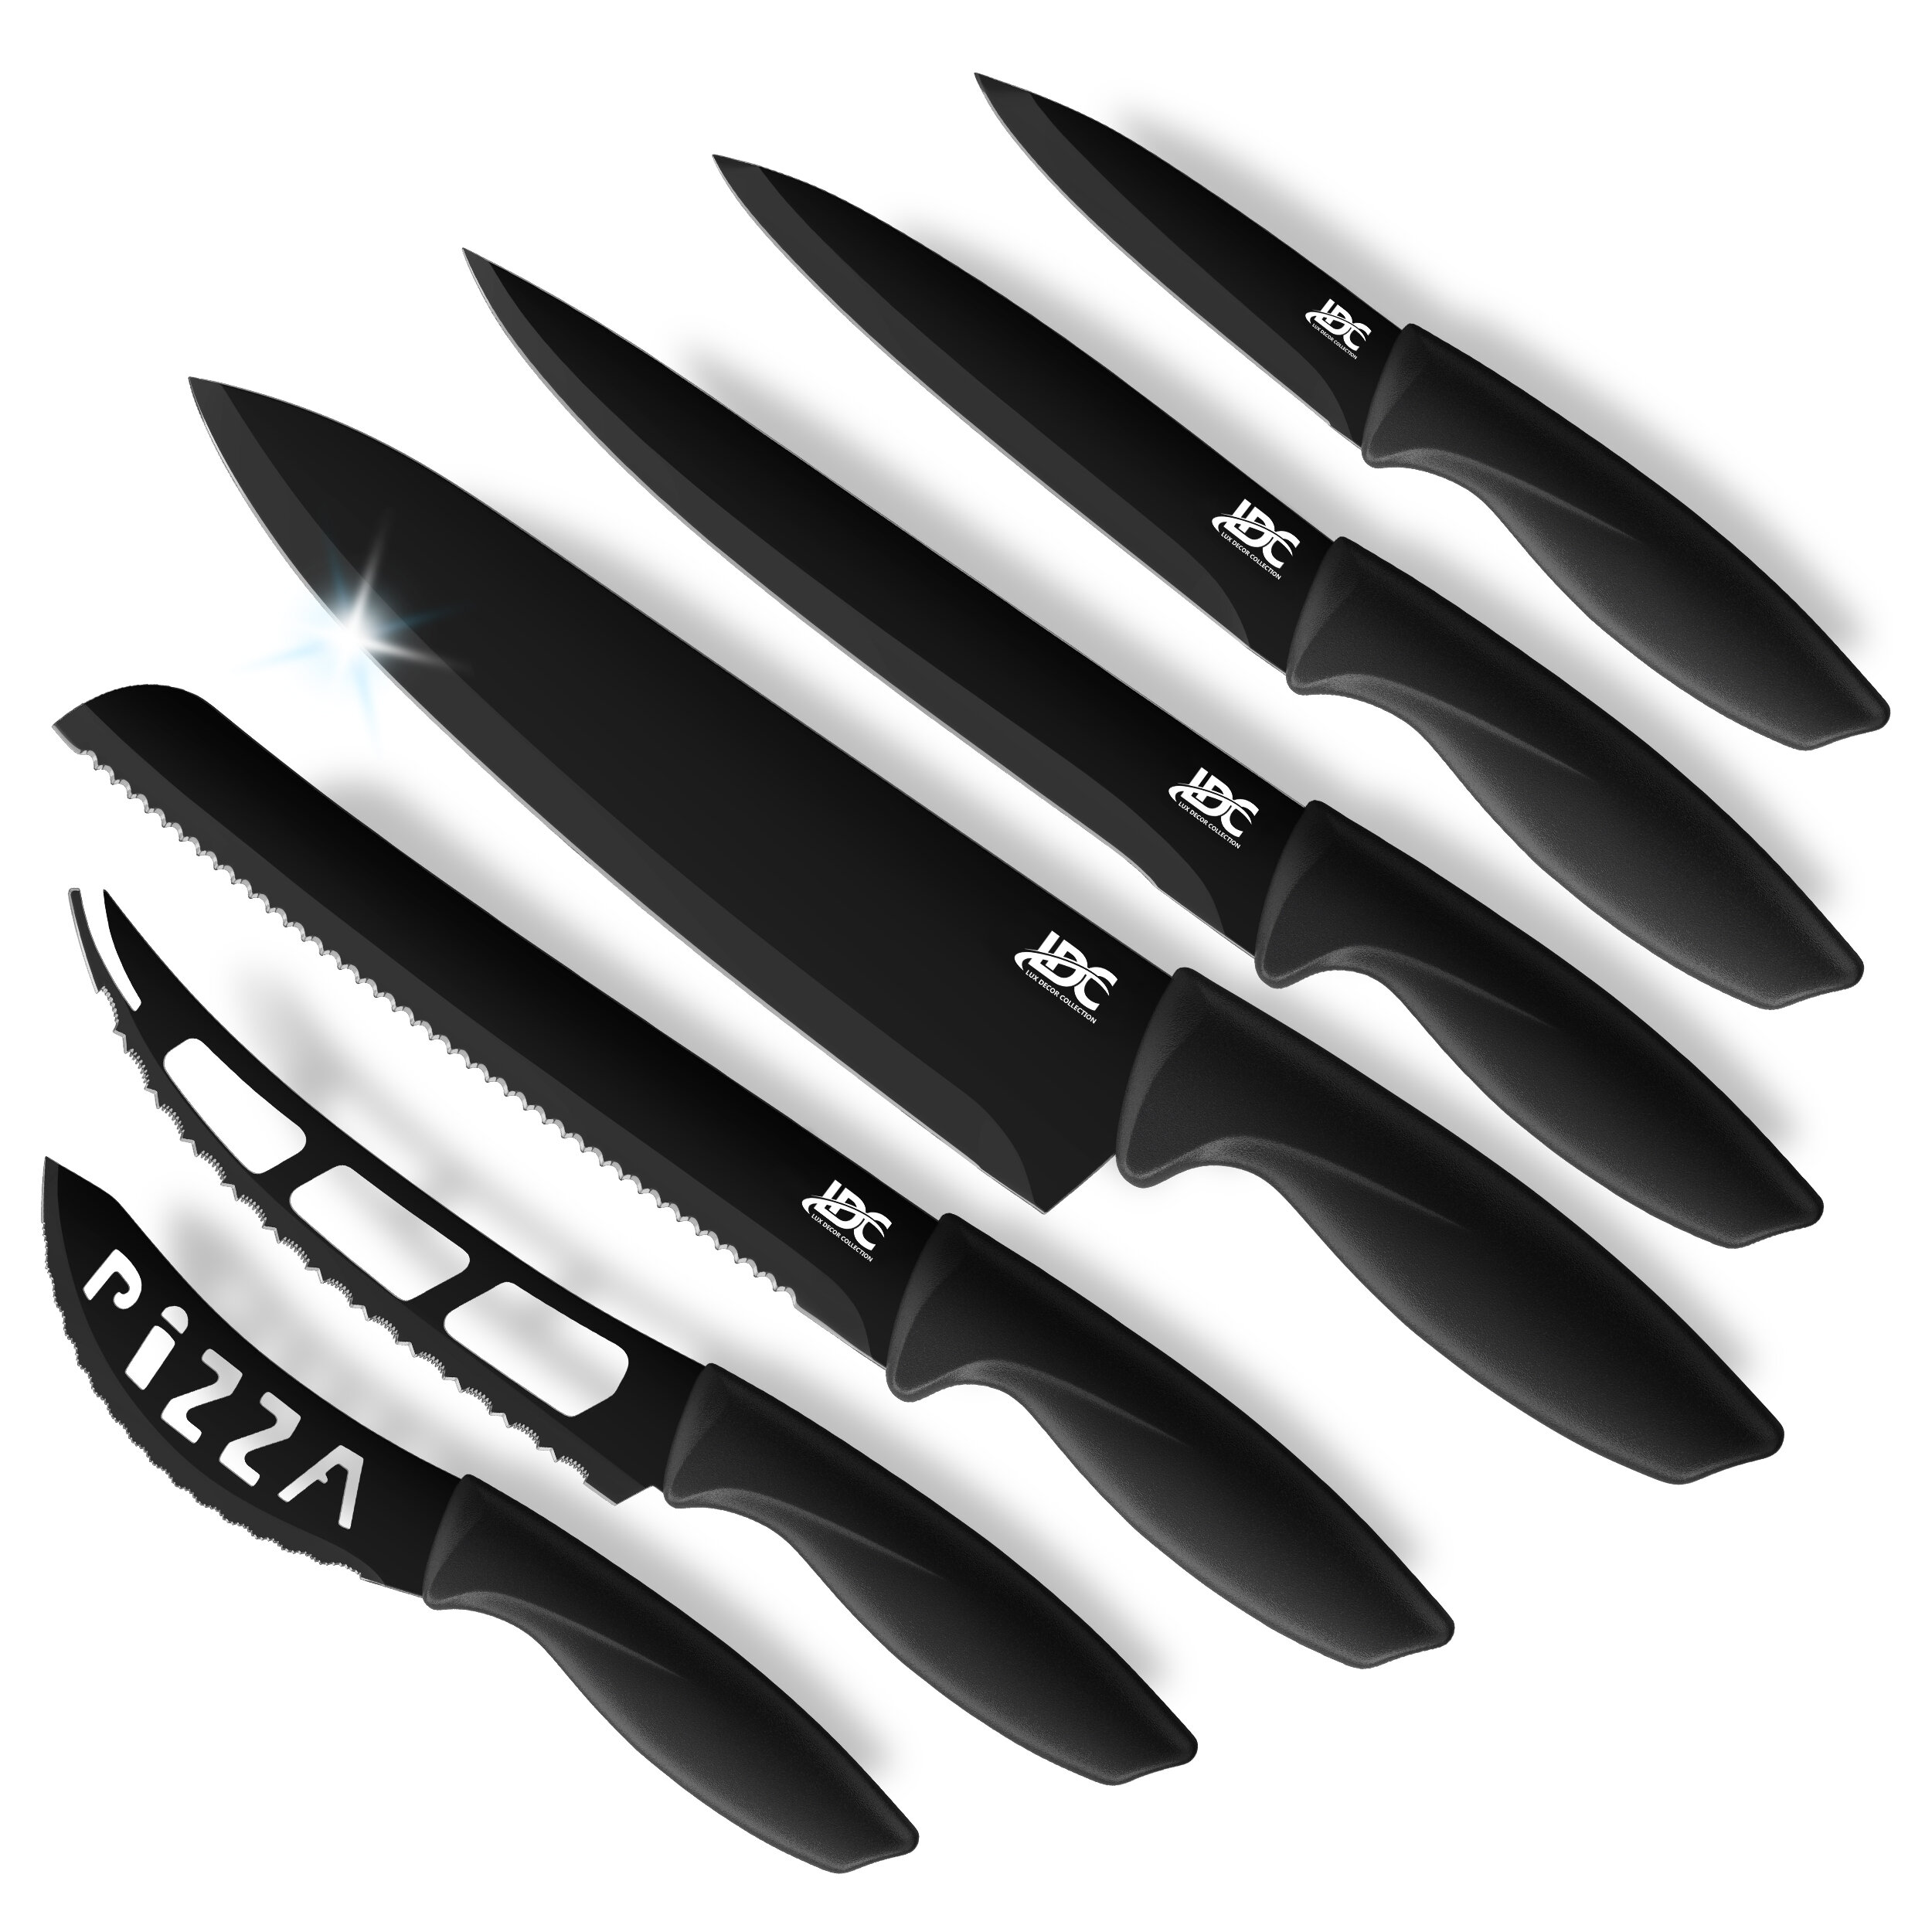 Lux Decor Collection 15-Piece Kitchen Knife Set - High Carbon Stainless Steel, Non-Stick Coating, Rust-Resistant, Ergonomic Handles - Perfect for